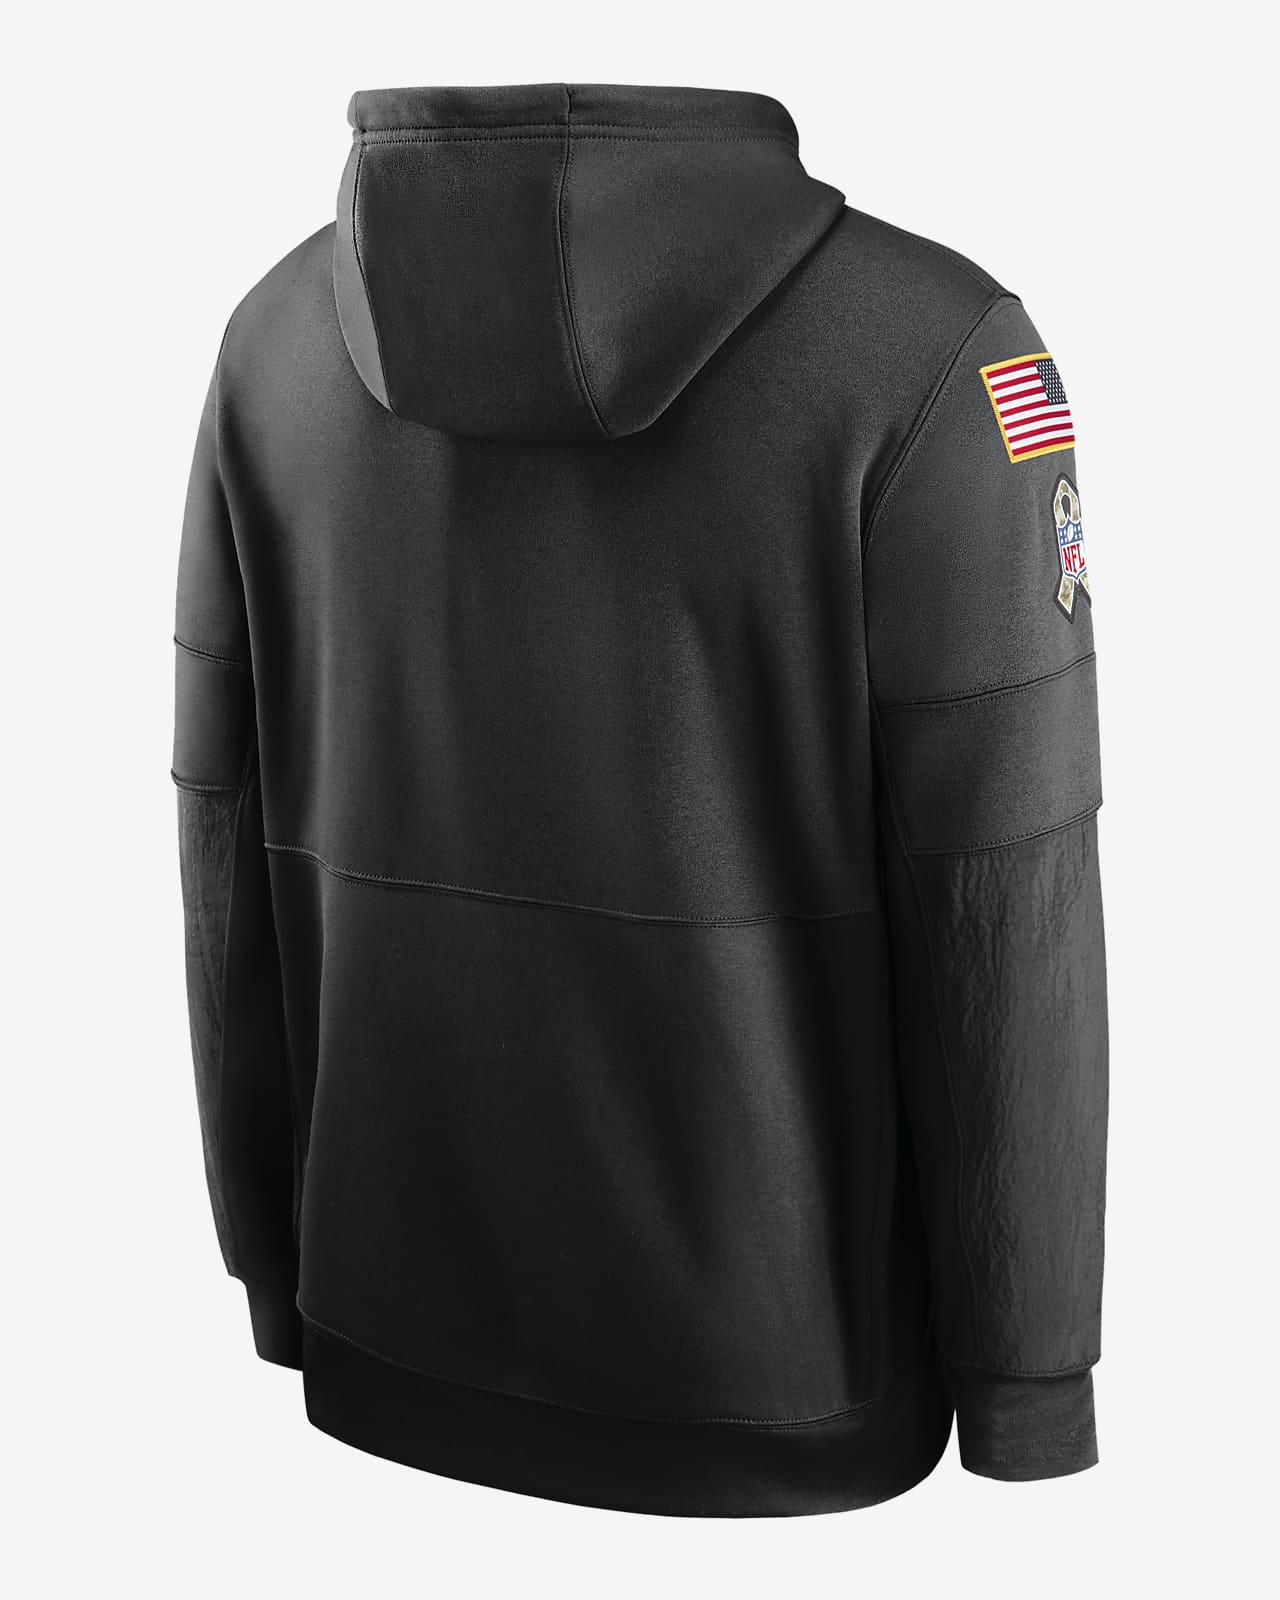 nfl hoodies salute to service